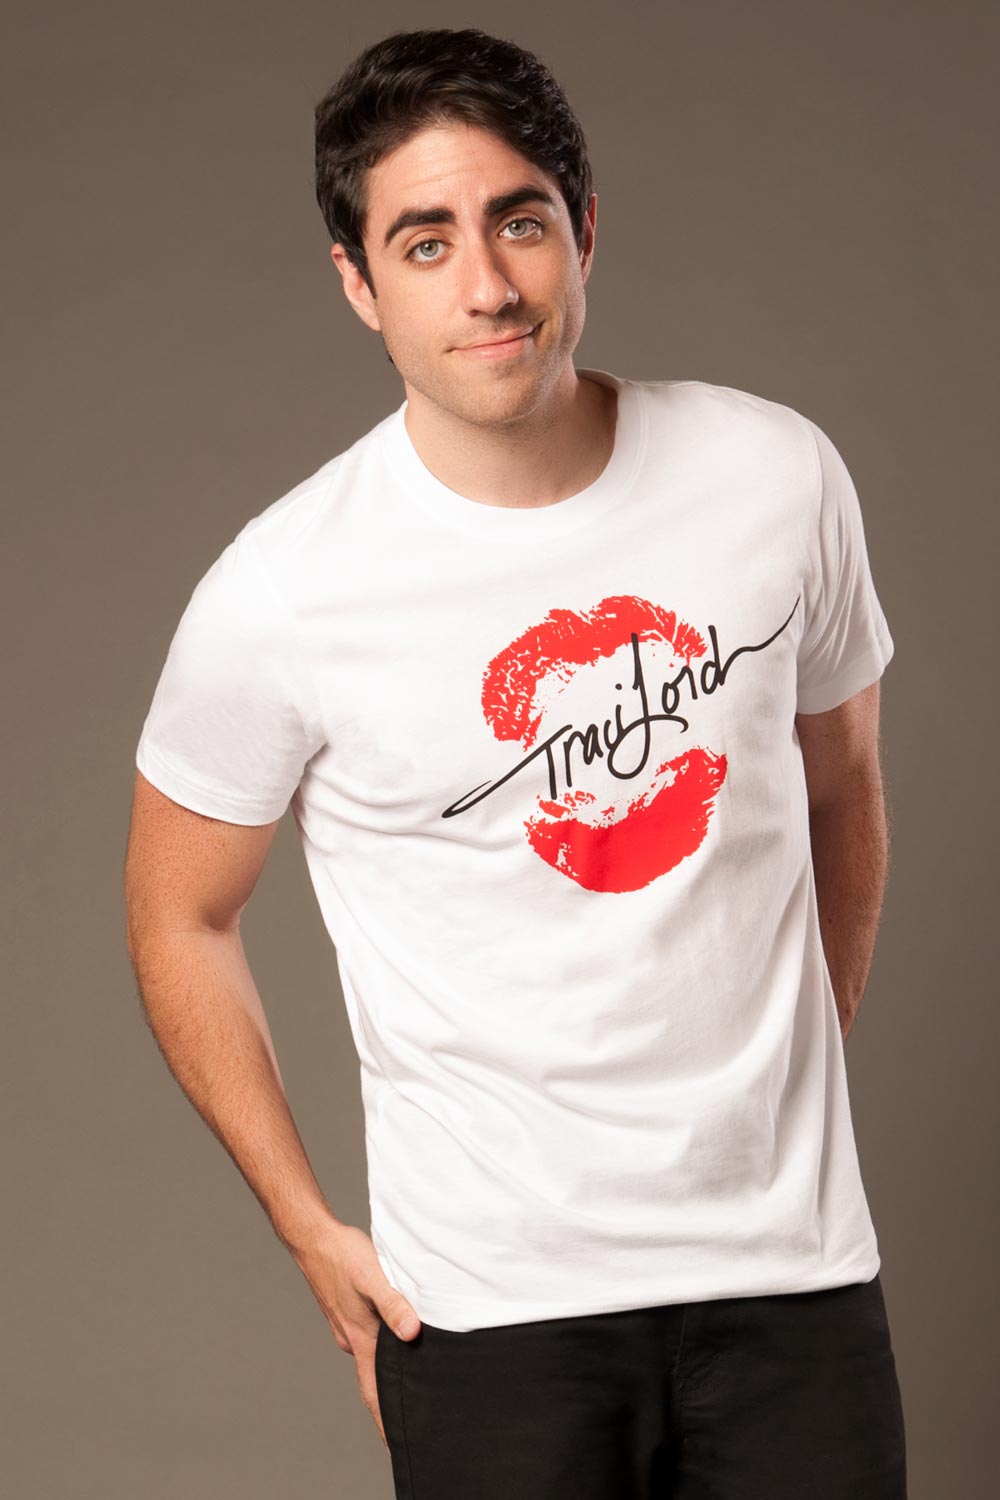 Rendezvous periode Bugt Men's Traci Lords Signature T-shirt in White – pinupgirlclothing.com